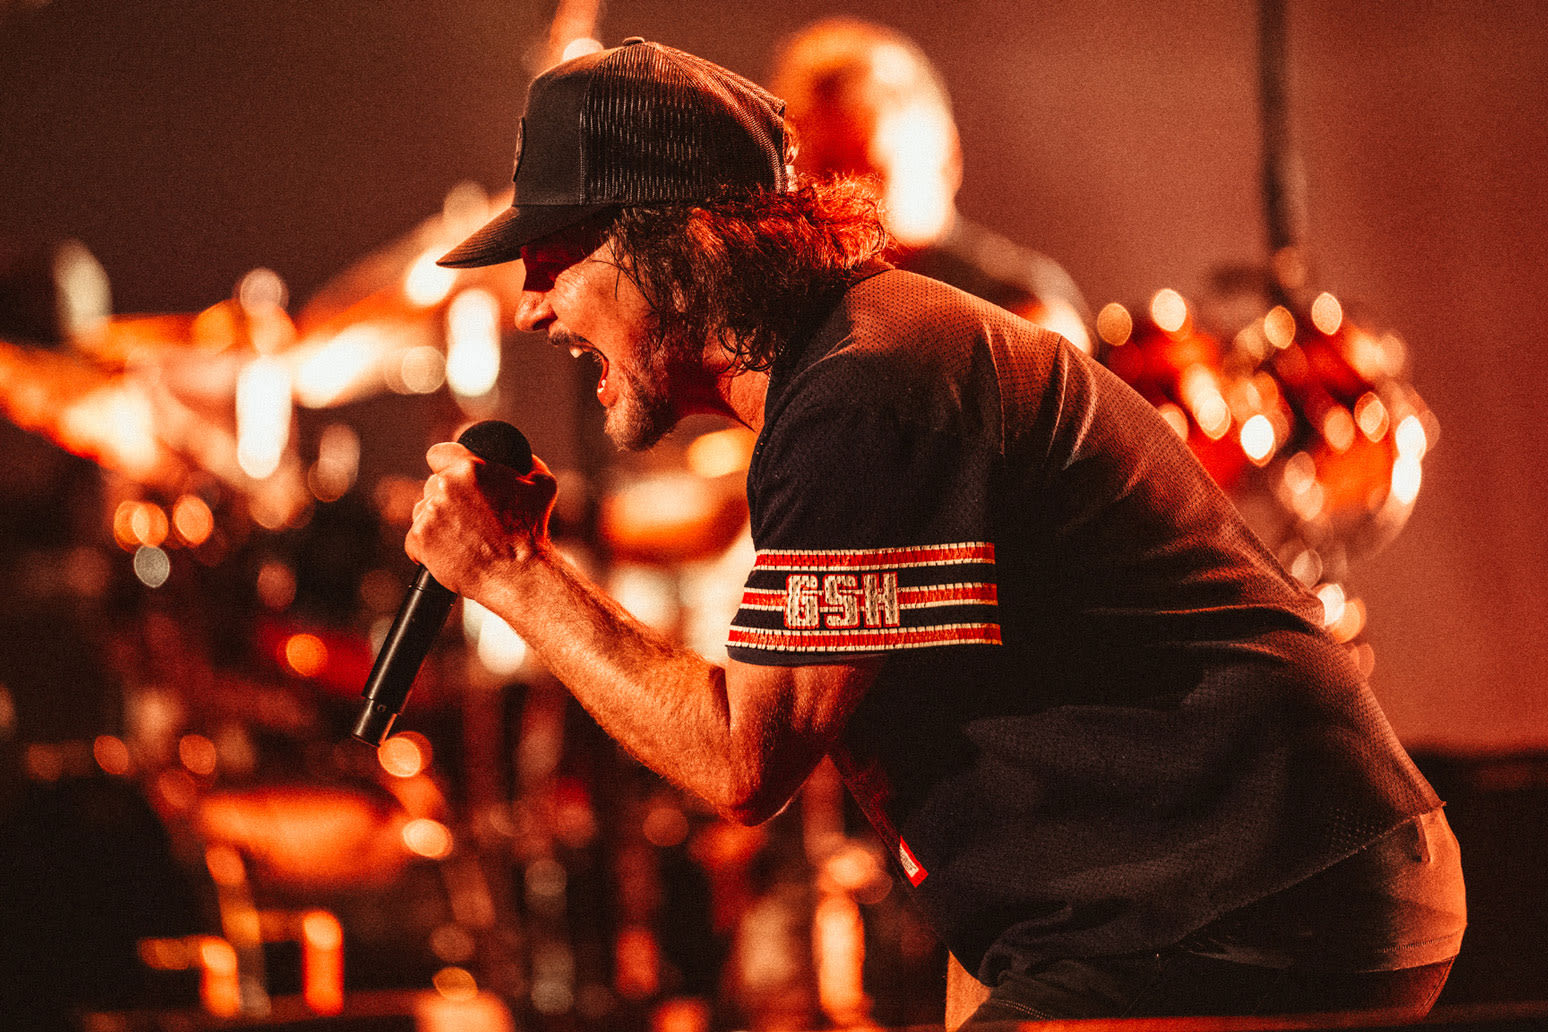 Pearl Jam Delivers a Muscular, Tribute-Heavy Show on Night 2 at Los Angeles’ Kia Forum